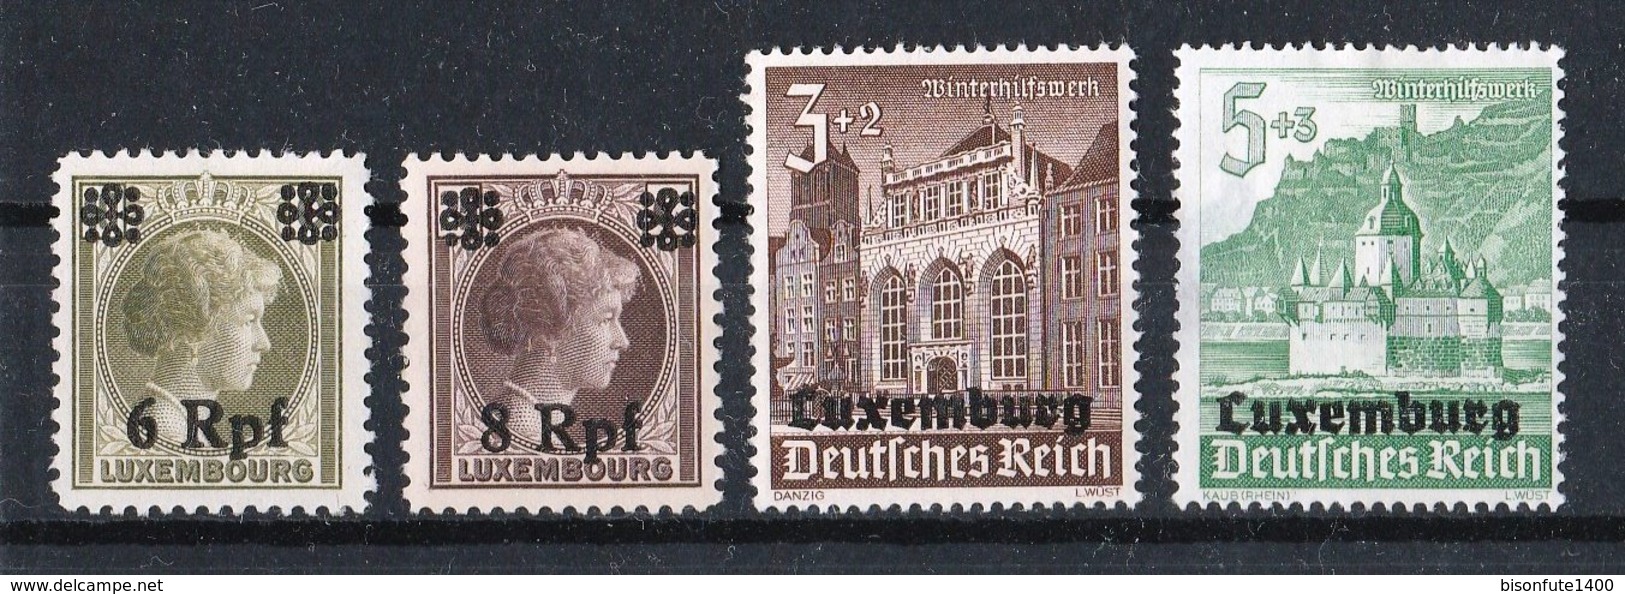 Luxembourg Occupation Allemande : Timbres Y&T N° 1 - 2 - 3 - 5 - 7 - 17 - 18 - 19 - 20 - 21 - 33 Et 35. - Occupazione